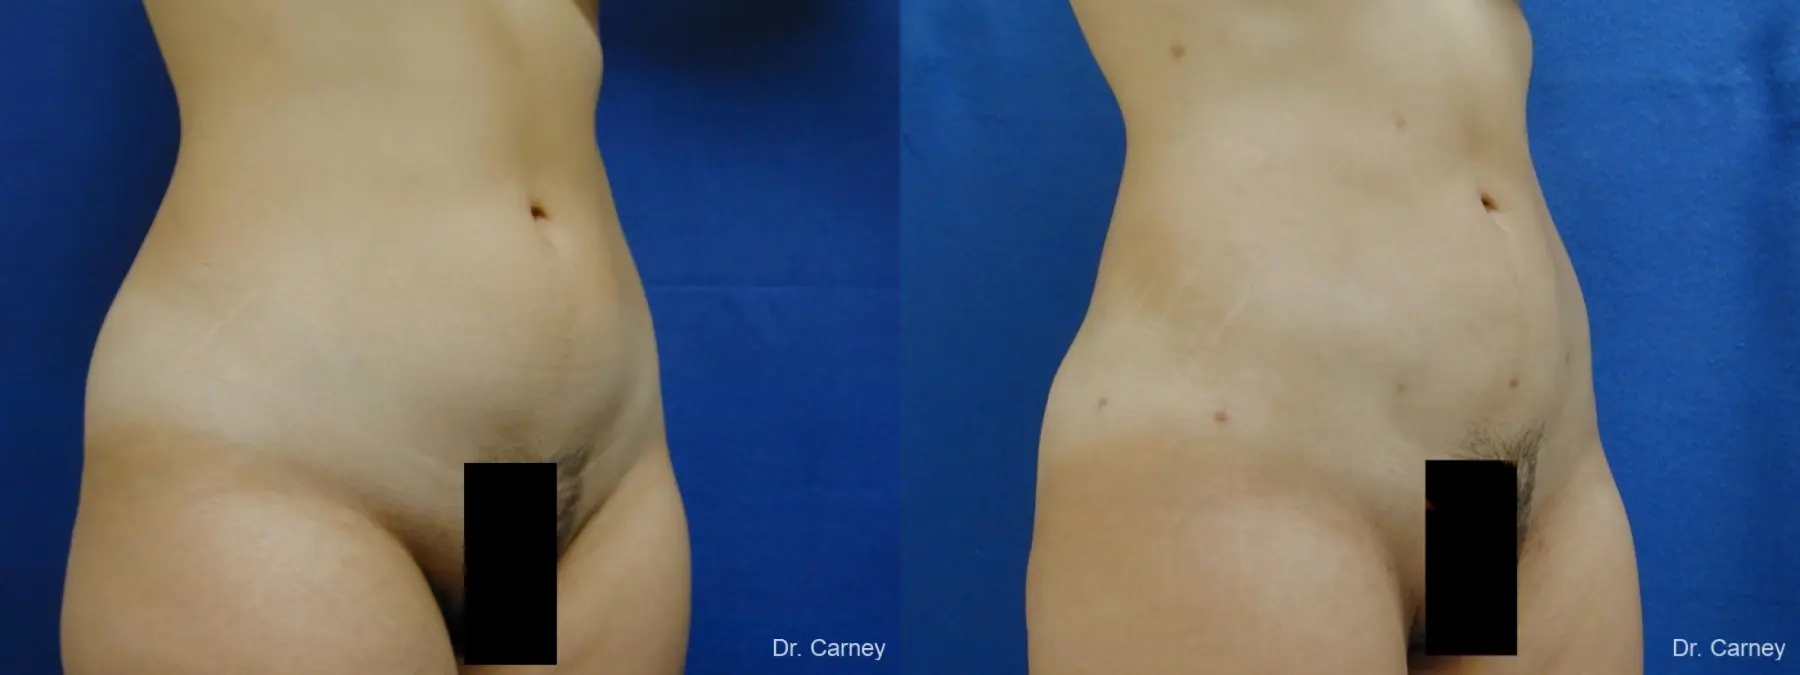 Virginia Beach Liposuction 1276 - Before and After 2